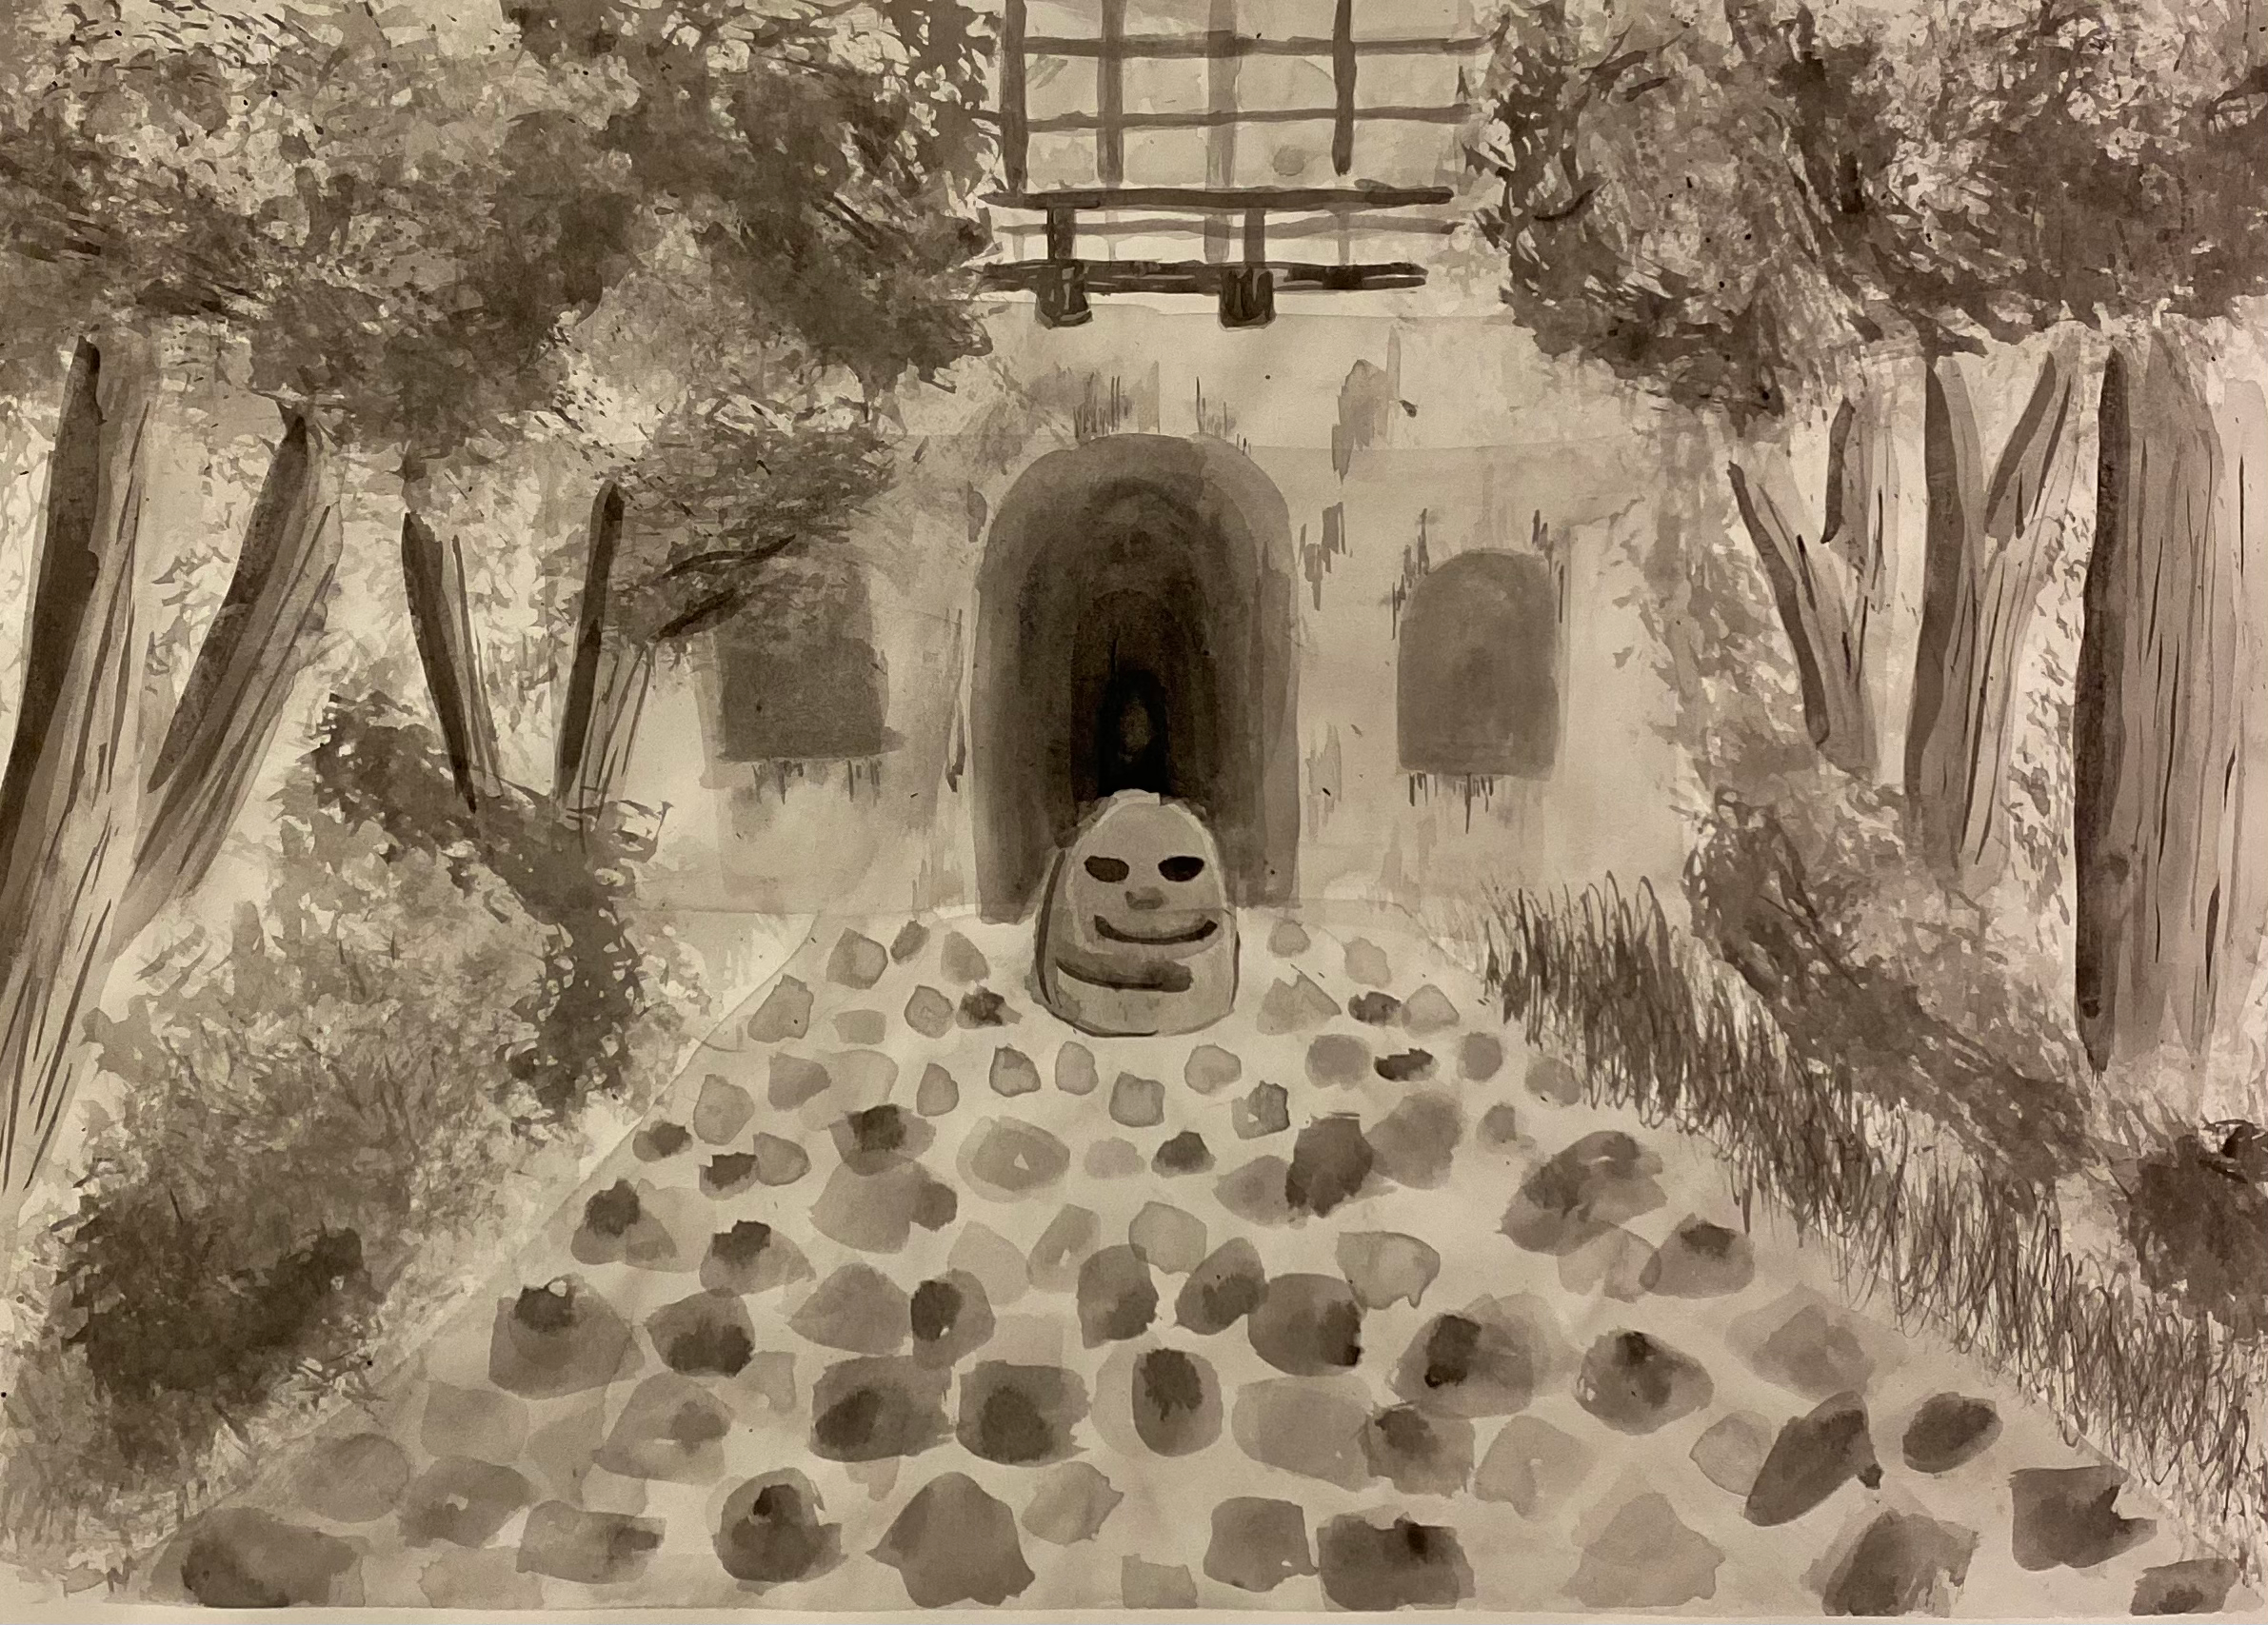 The Gate Scene from Spirited Away,” Connor Mathieson, 202